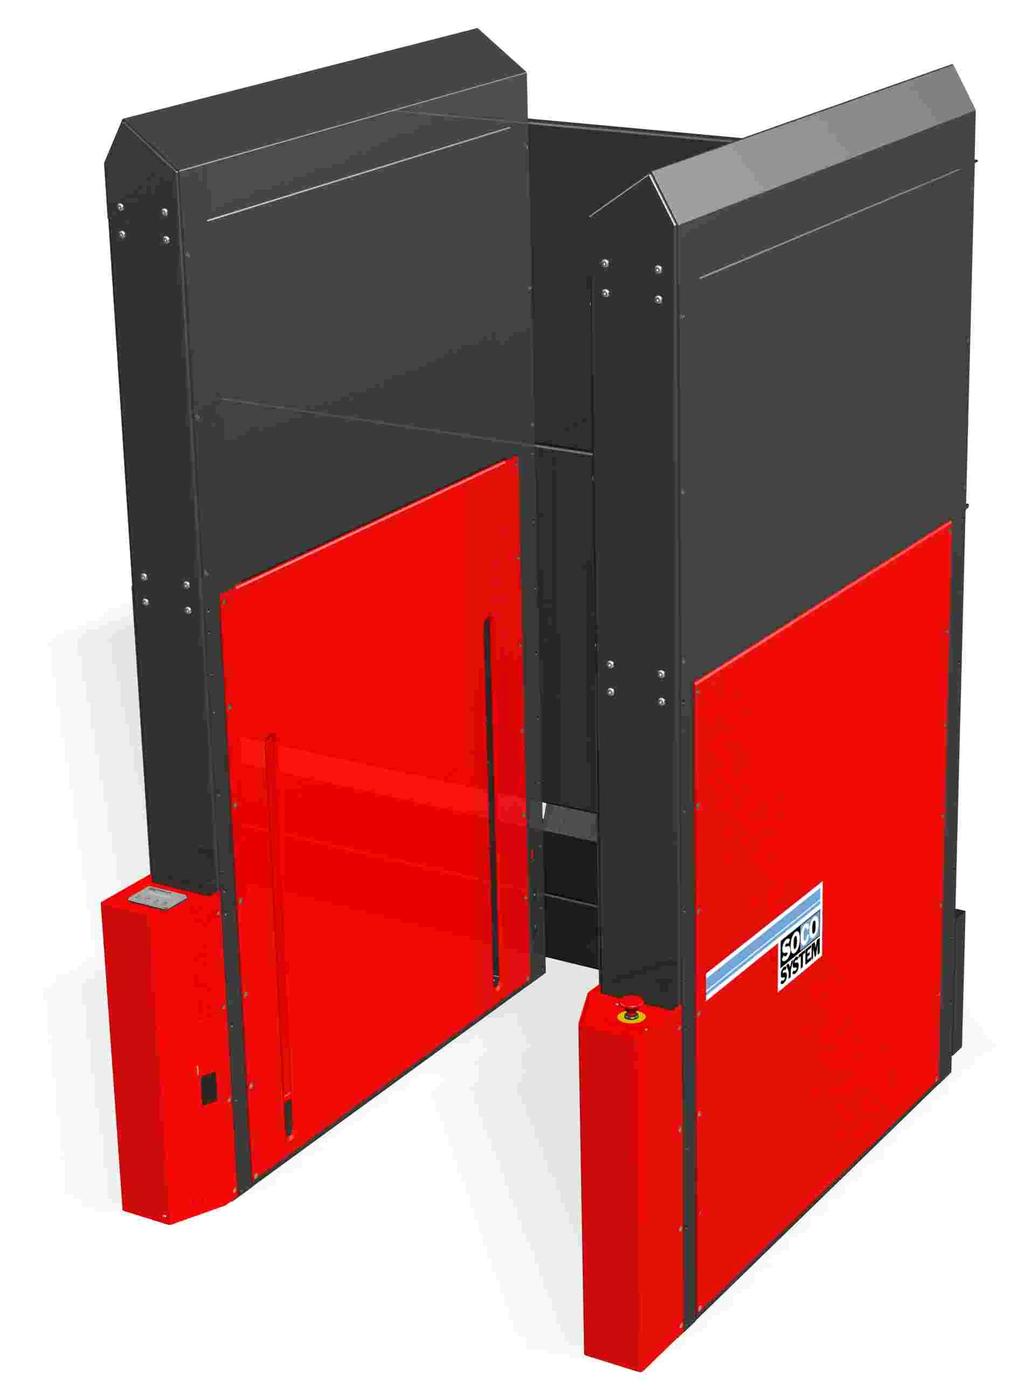 Pallet magazines PalManager GM5 1-5 pallets at a time. PalManager GM5 is used for stacking of up to 16 pallets or as a magazine from where the operator can collect one or more pallets at a time.